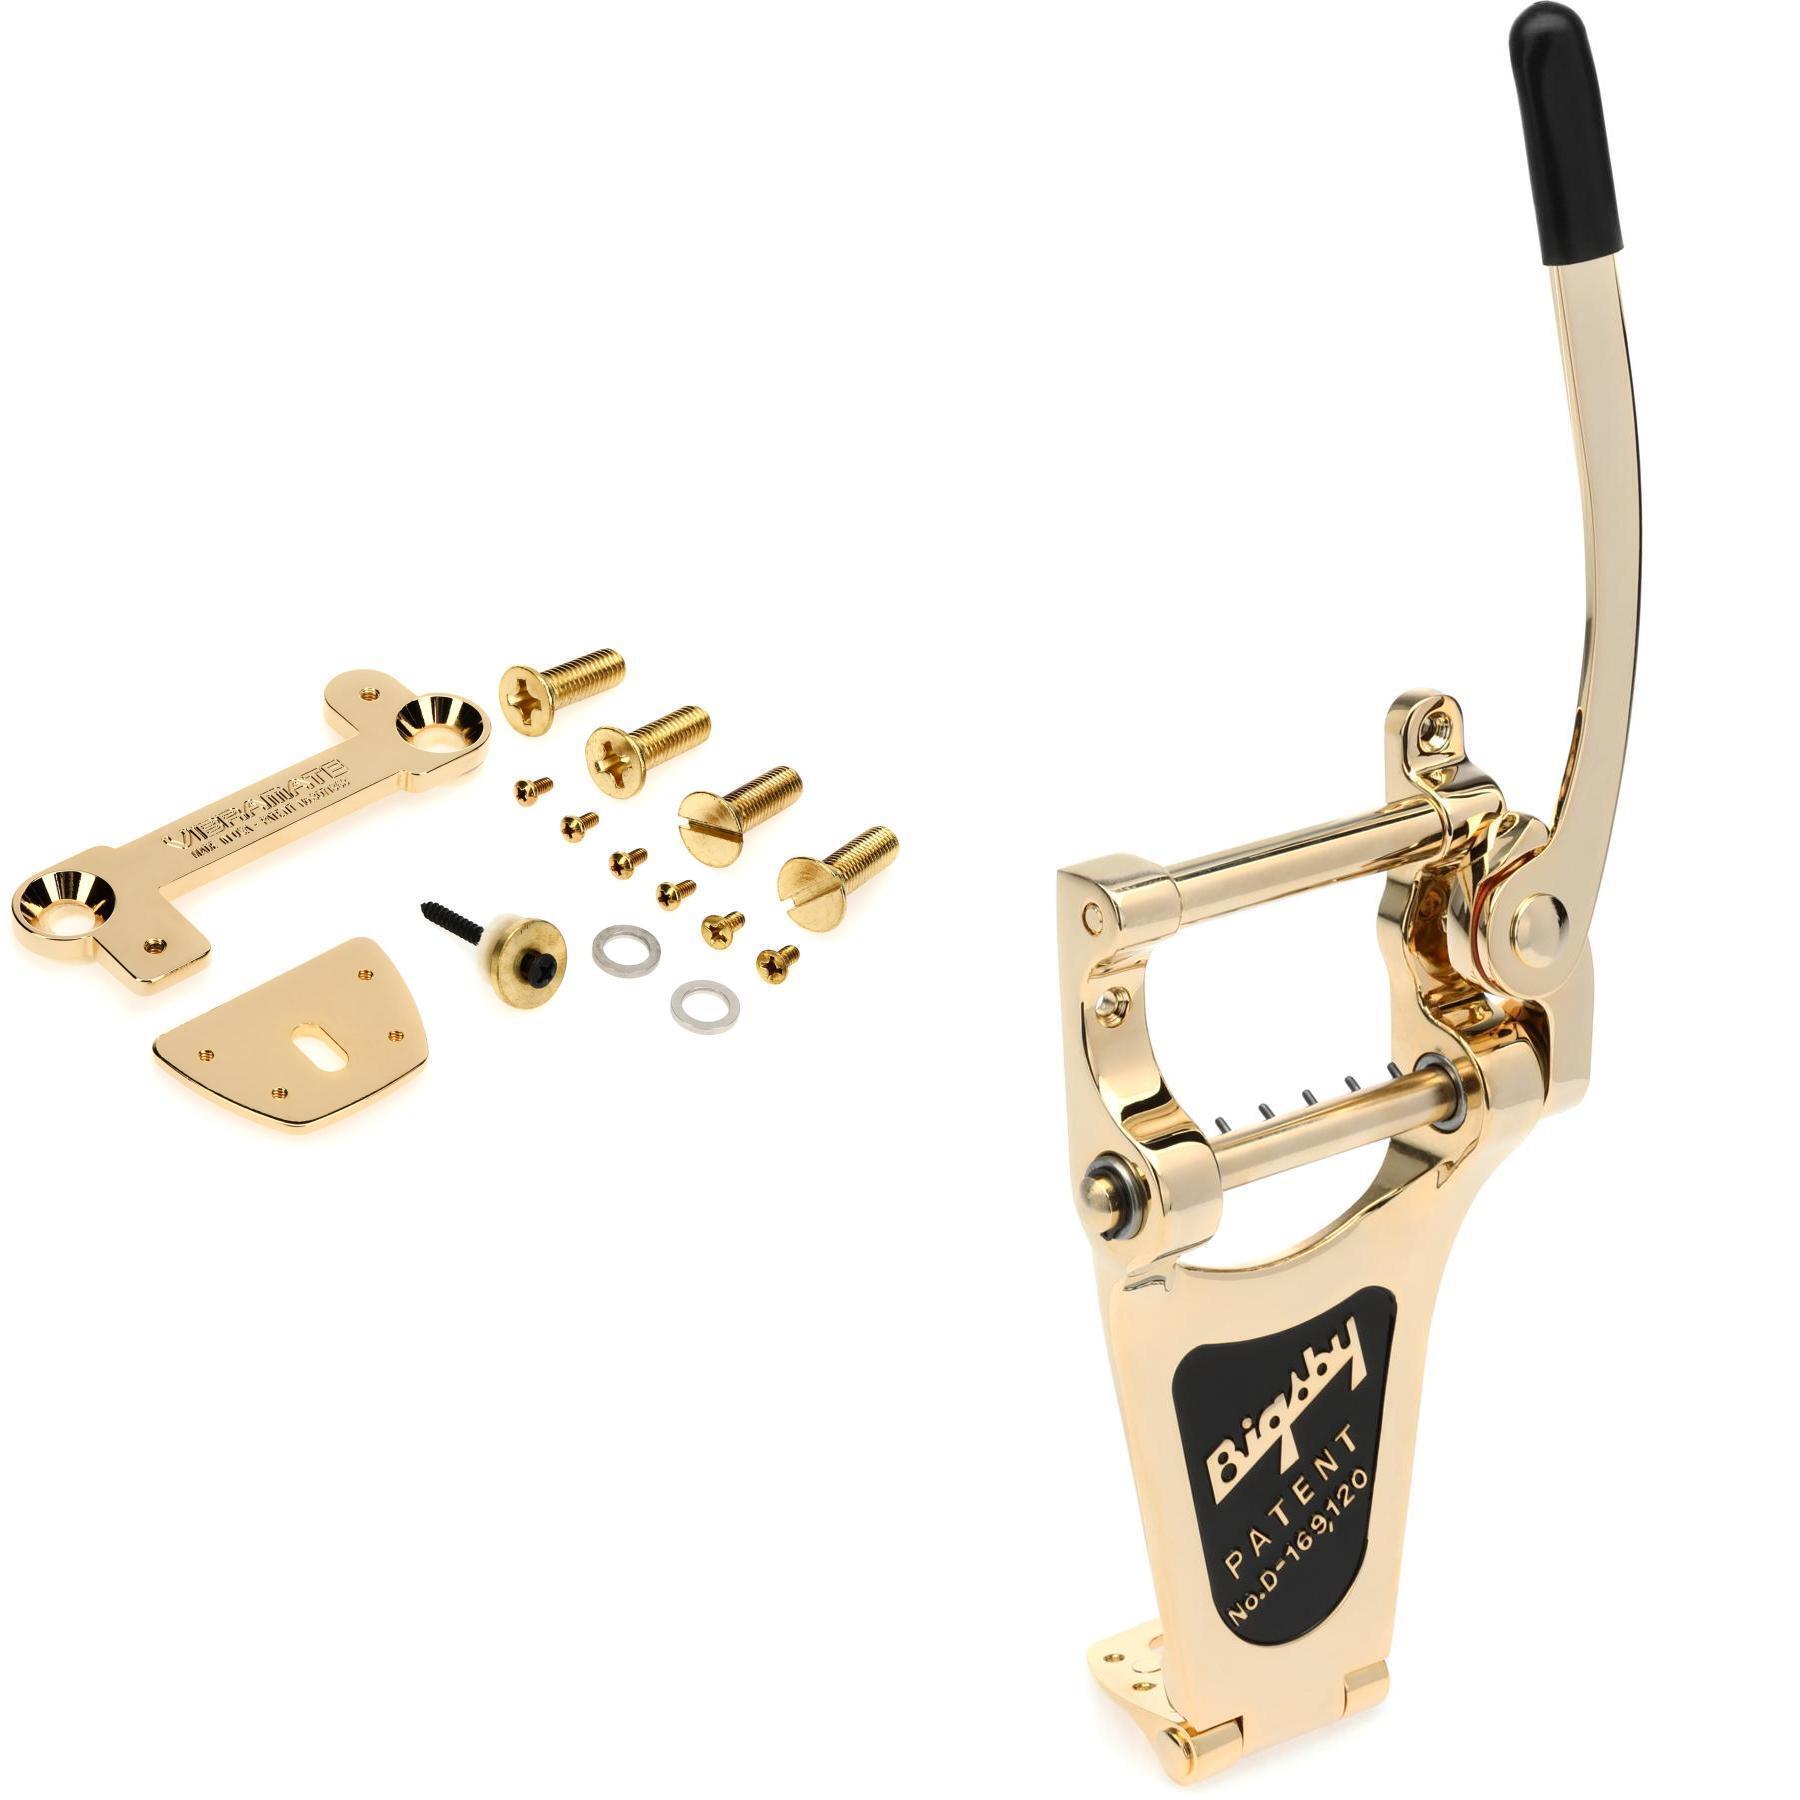 Vibramate V7 and Bigsby B7 Vibrato Tailpiece for Gibson Les Paul - Gold